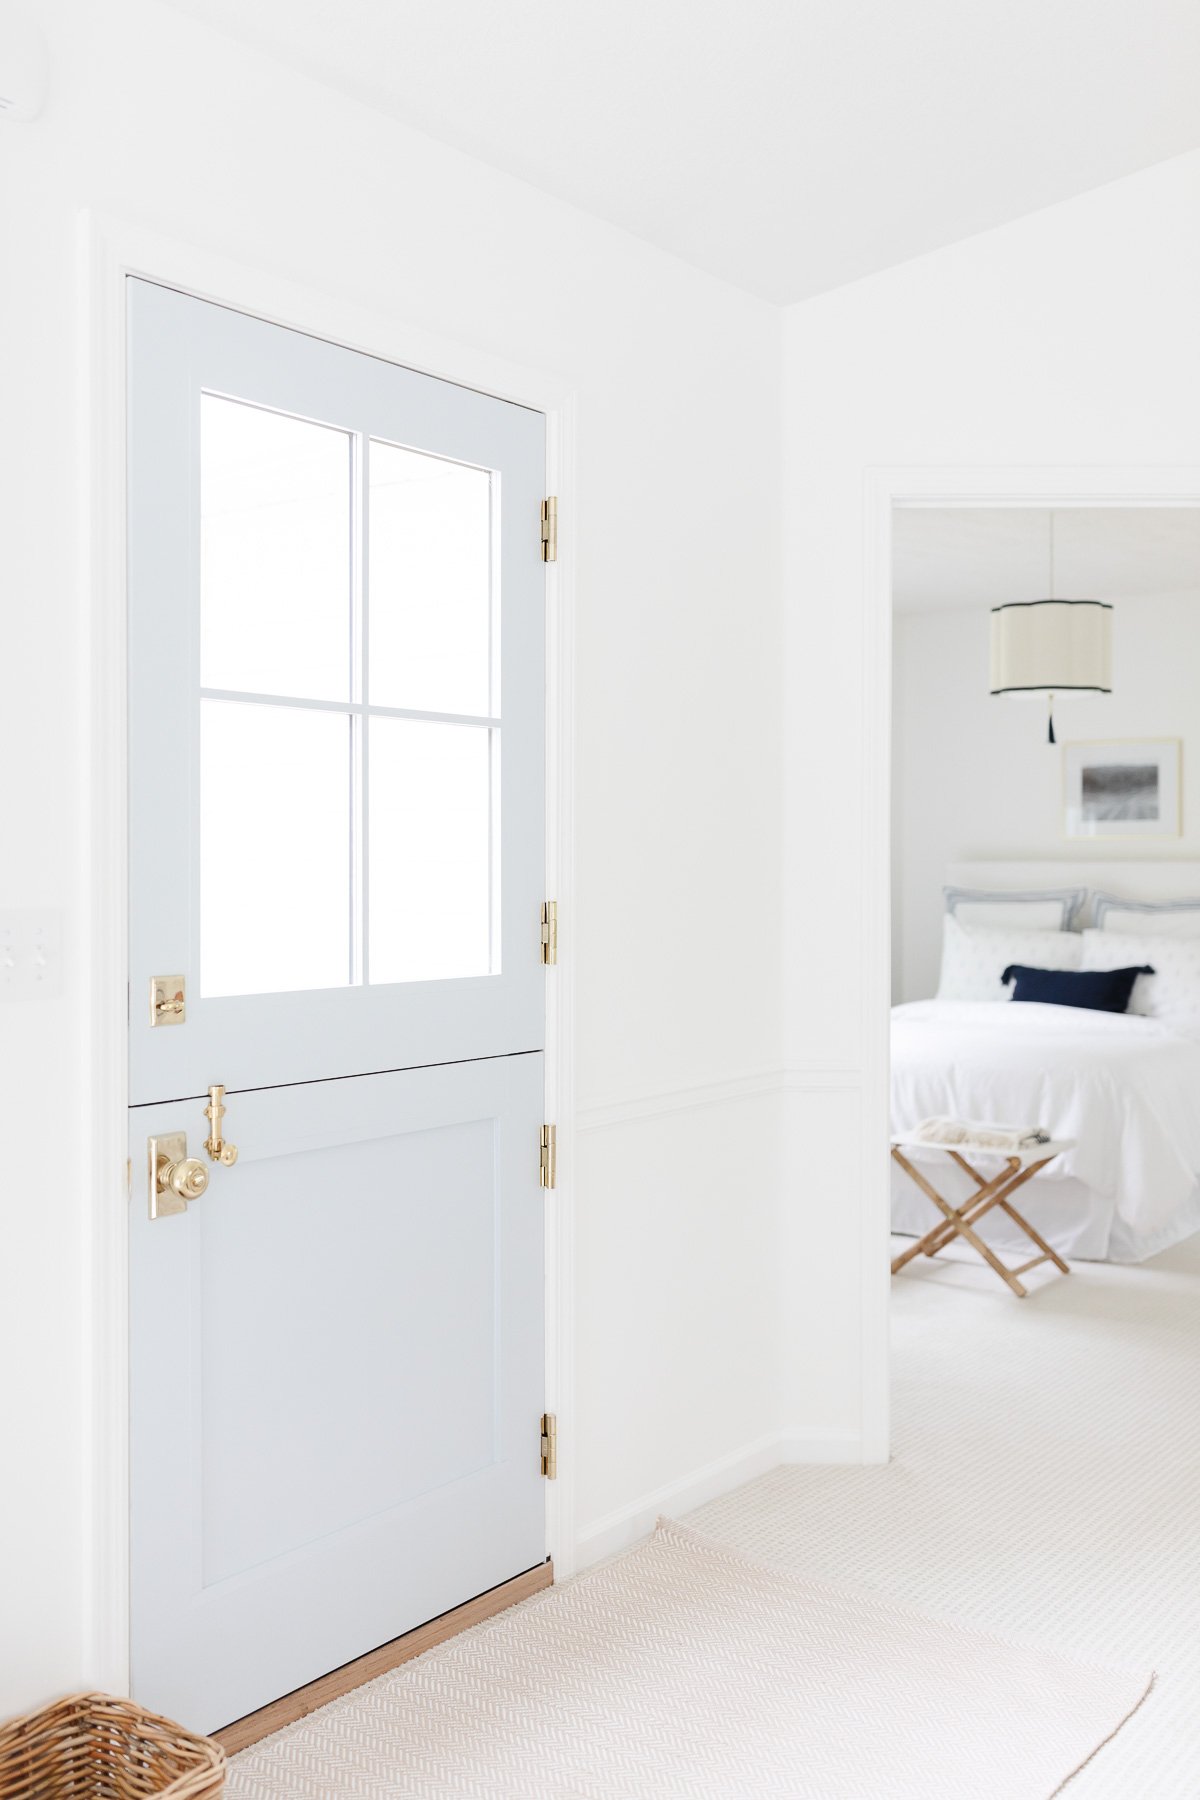 warm white walls and trim same color with blue door